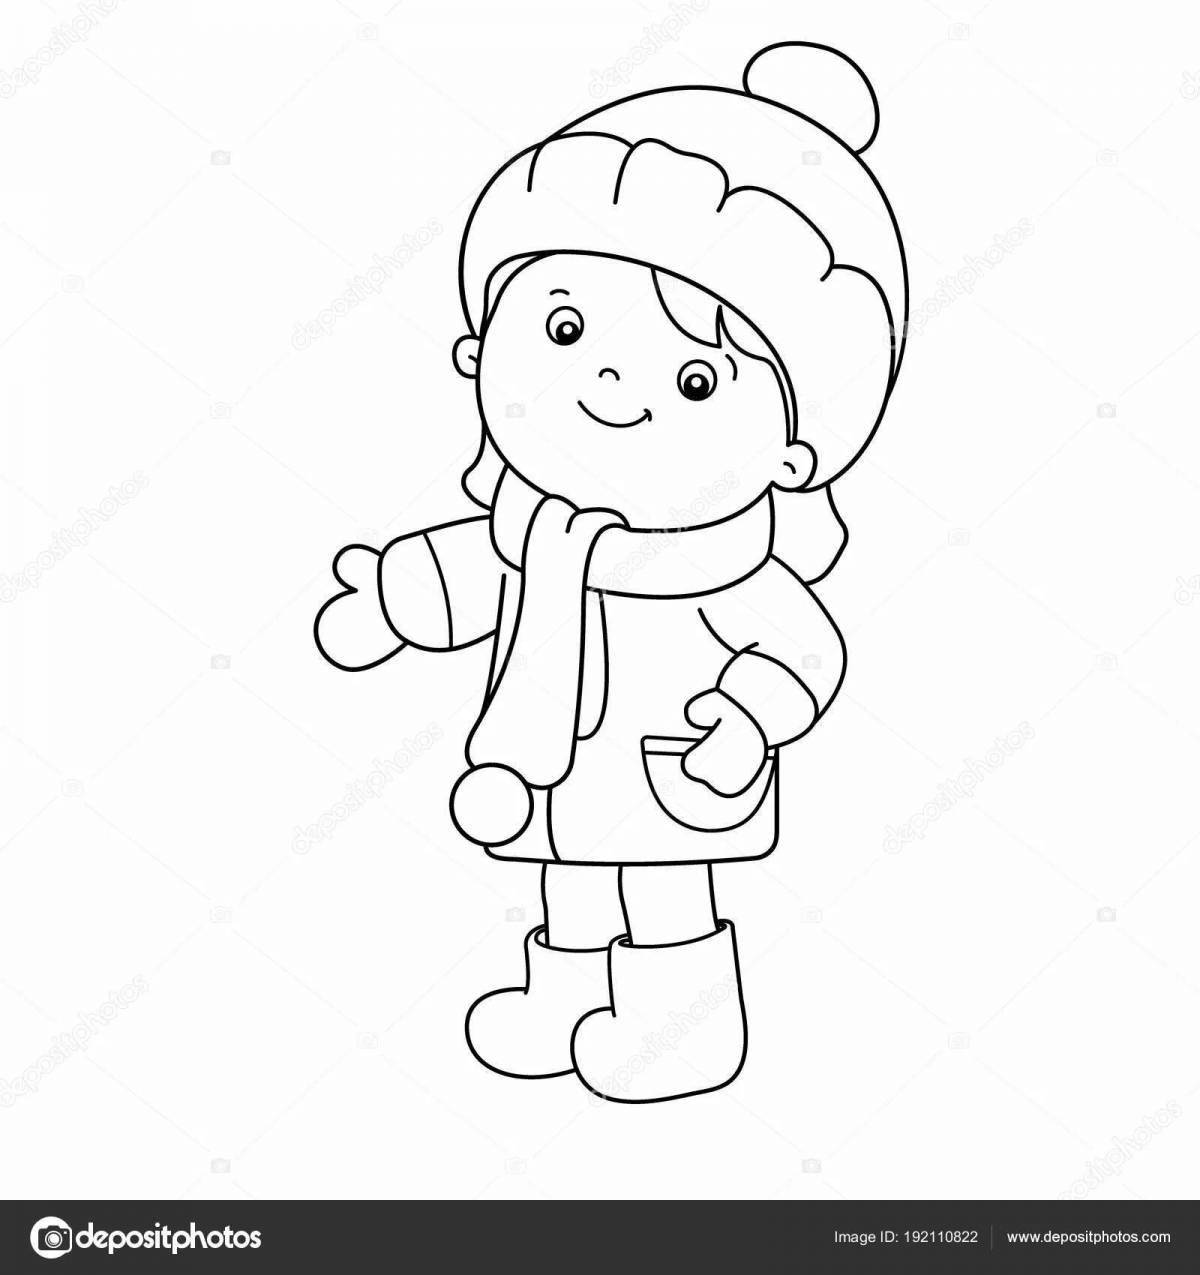 Coloring pages with cute winter clothes for children 5-6 years old